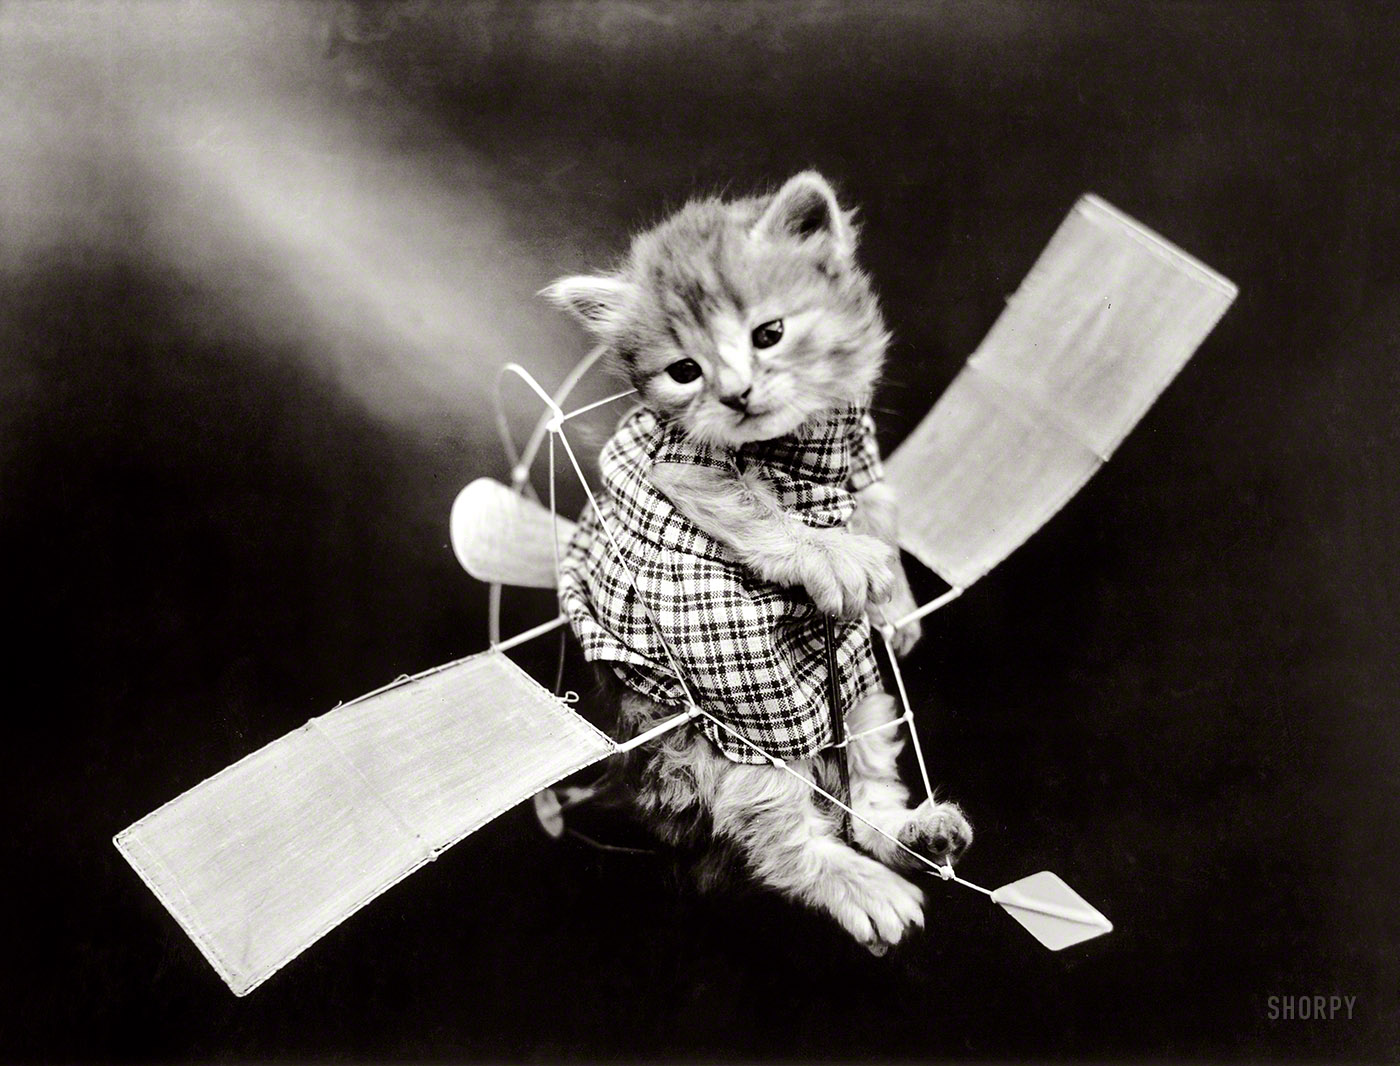 Circa 1914. "Cat in costume piloting toy airplane." Photo by Harry W. Frees, the Ansel Adams of feline kitsch. Or would that be catsch? View full size.